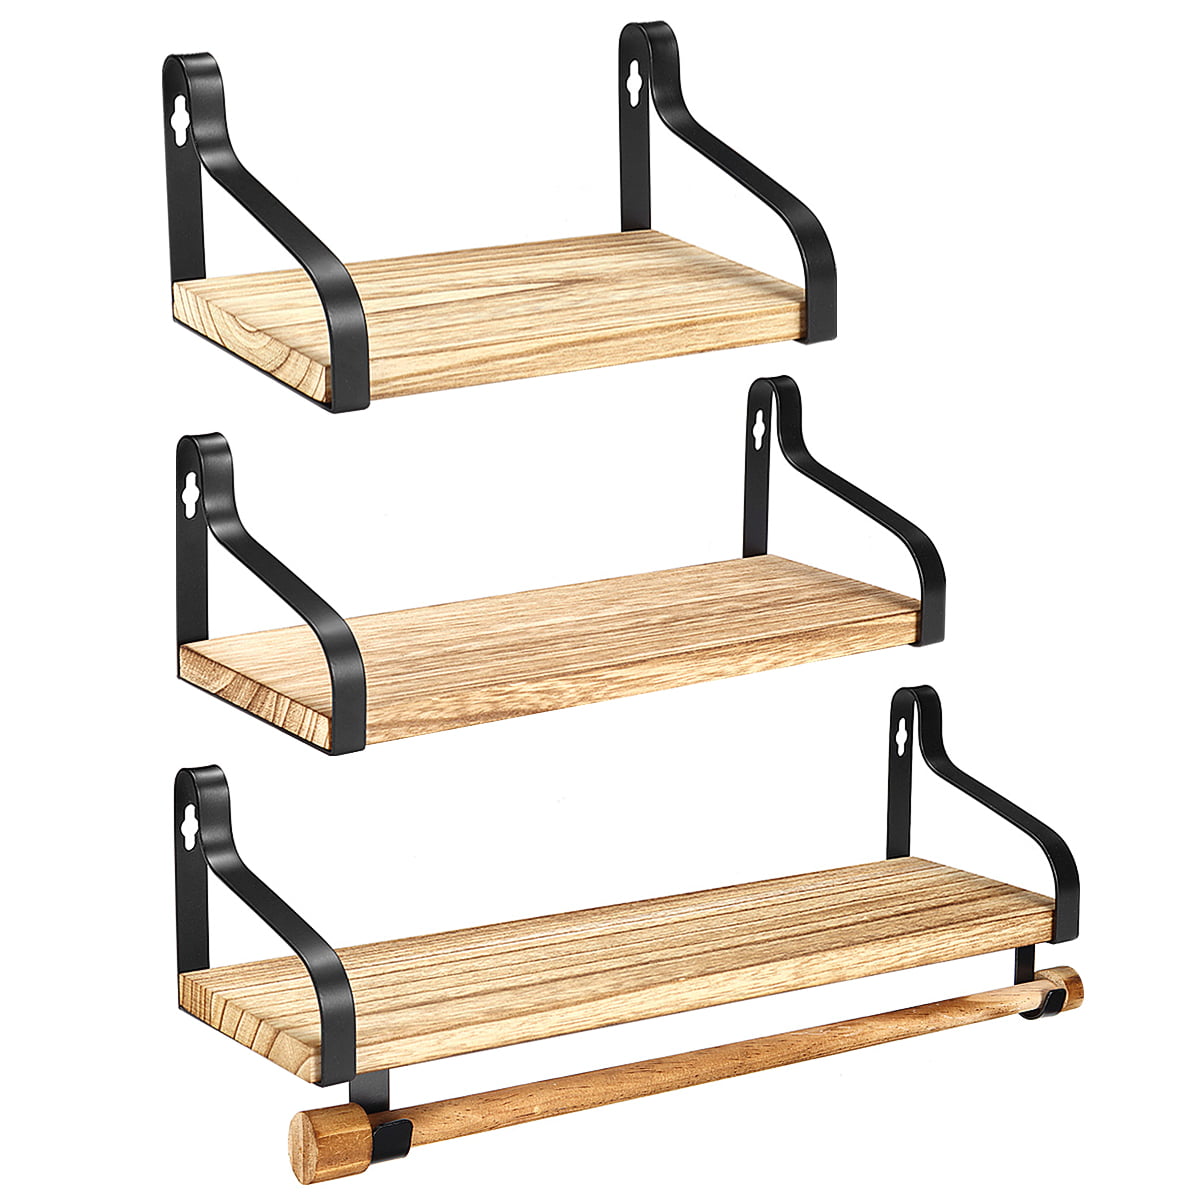 Details about   Multi Floating Shelves Wall Rustic Wood for Bathroom Living Room Bedroom Office 